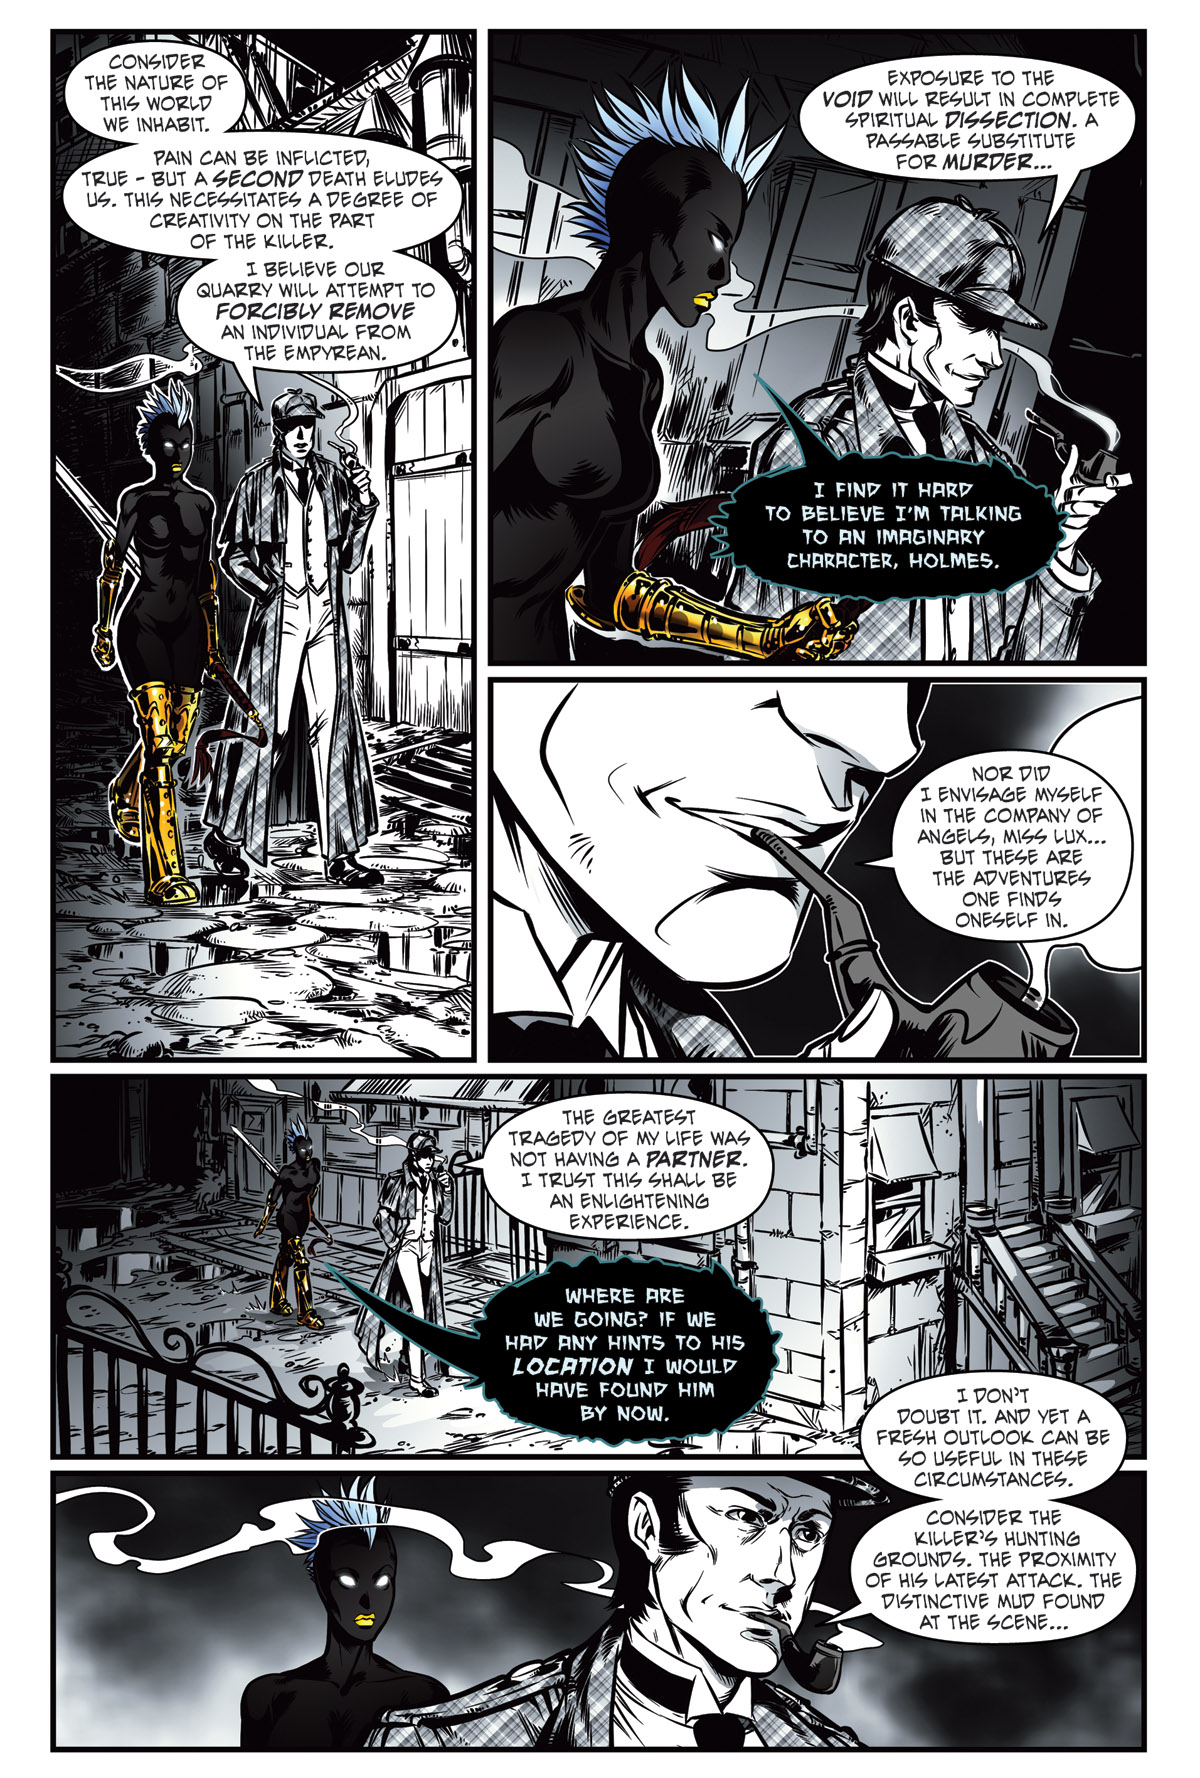 Afterlife Inc. | Elementary | Page 4